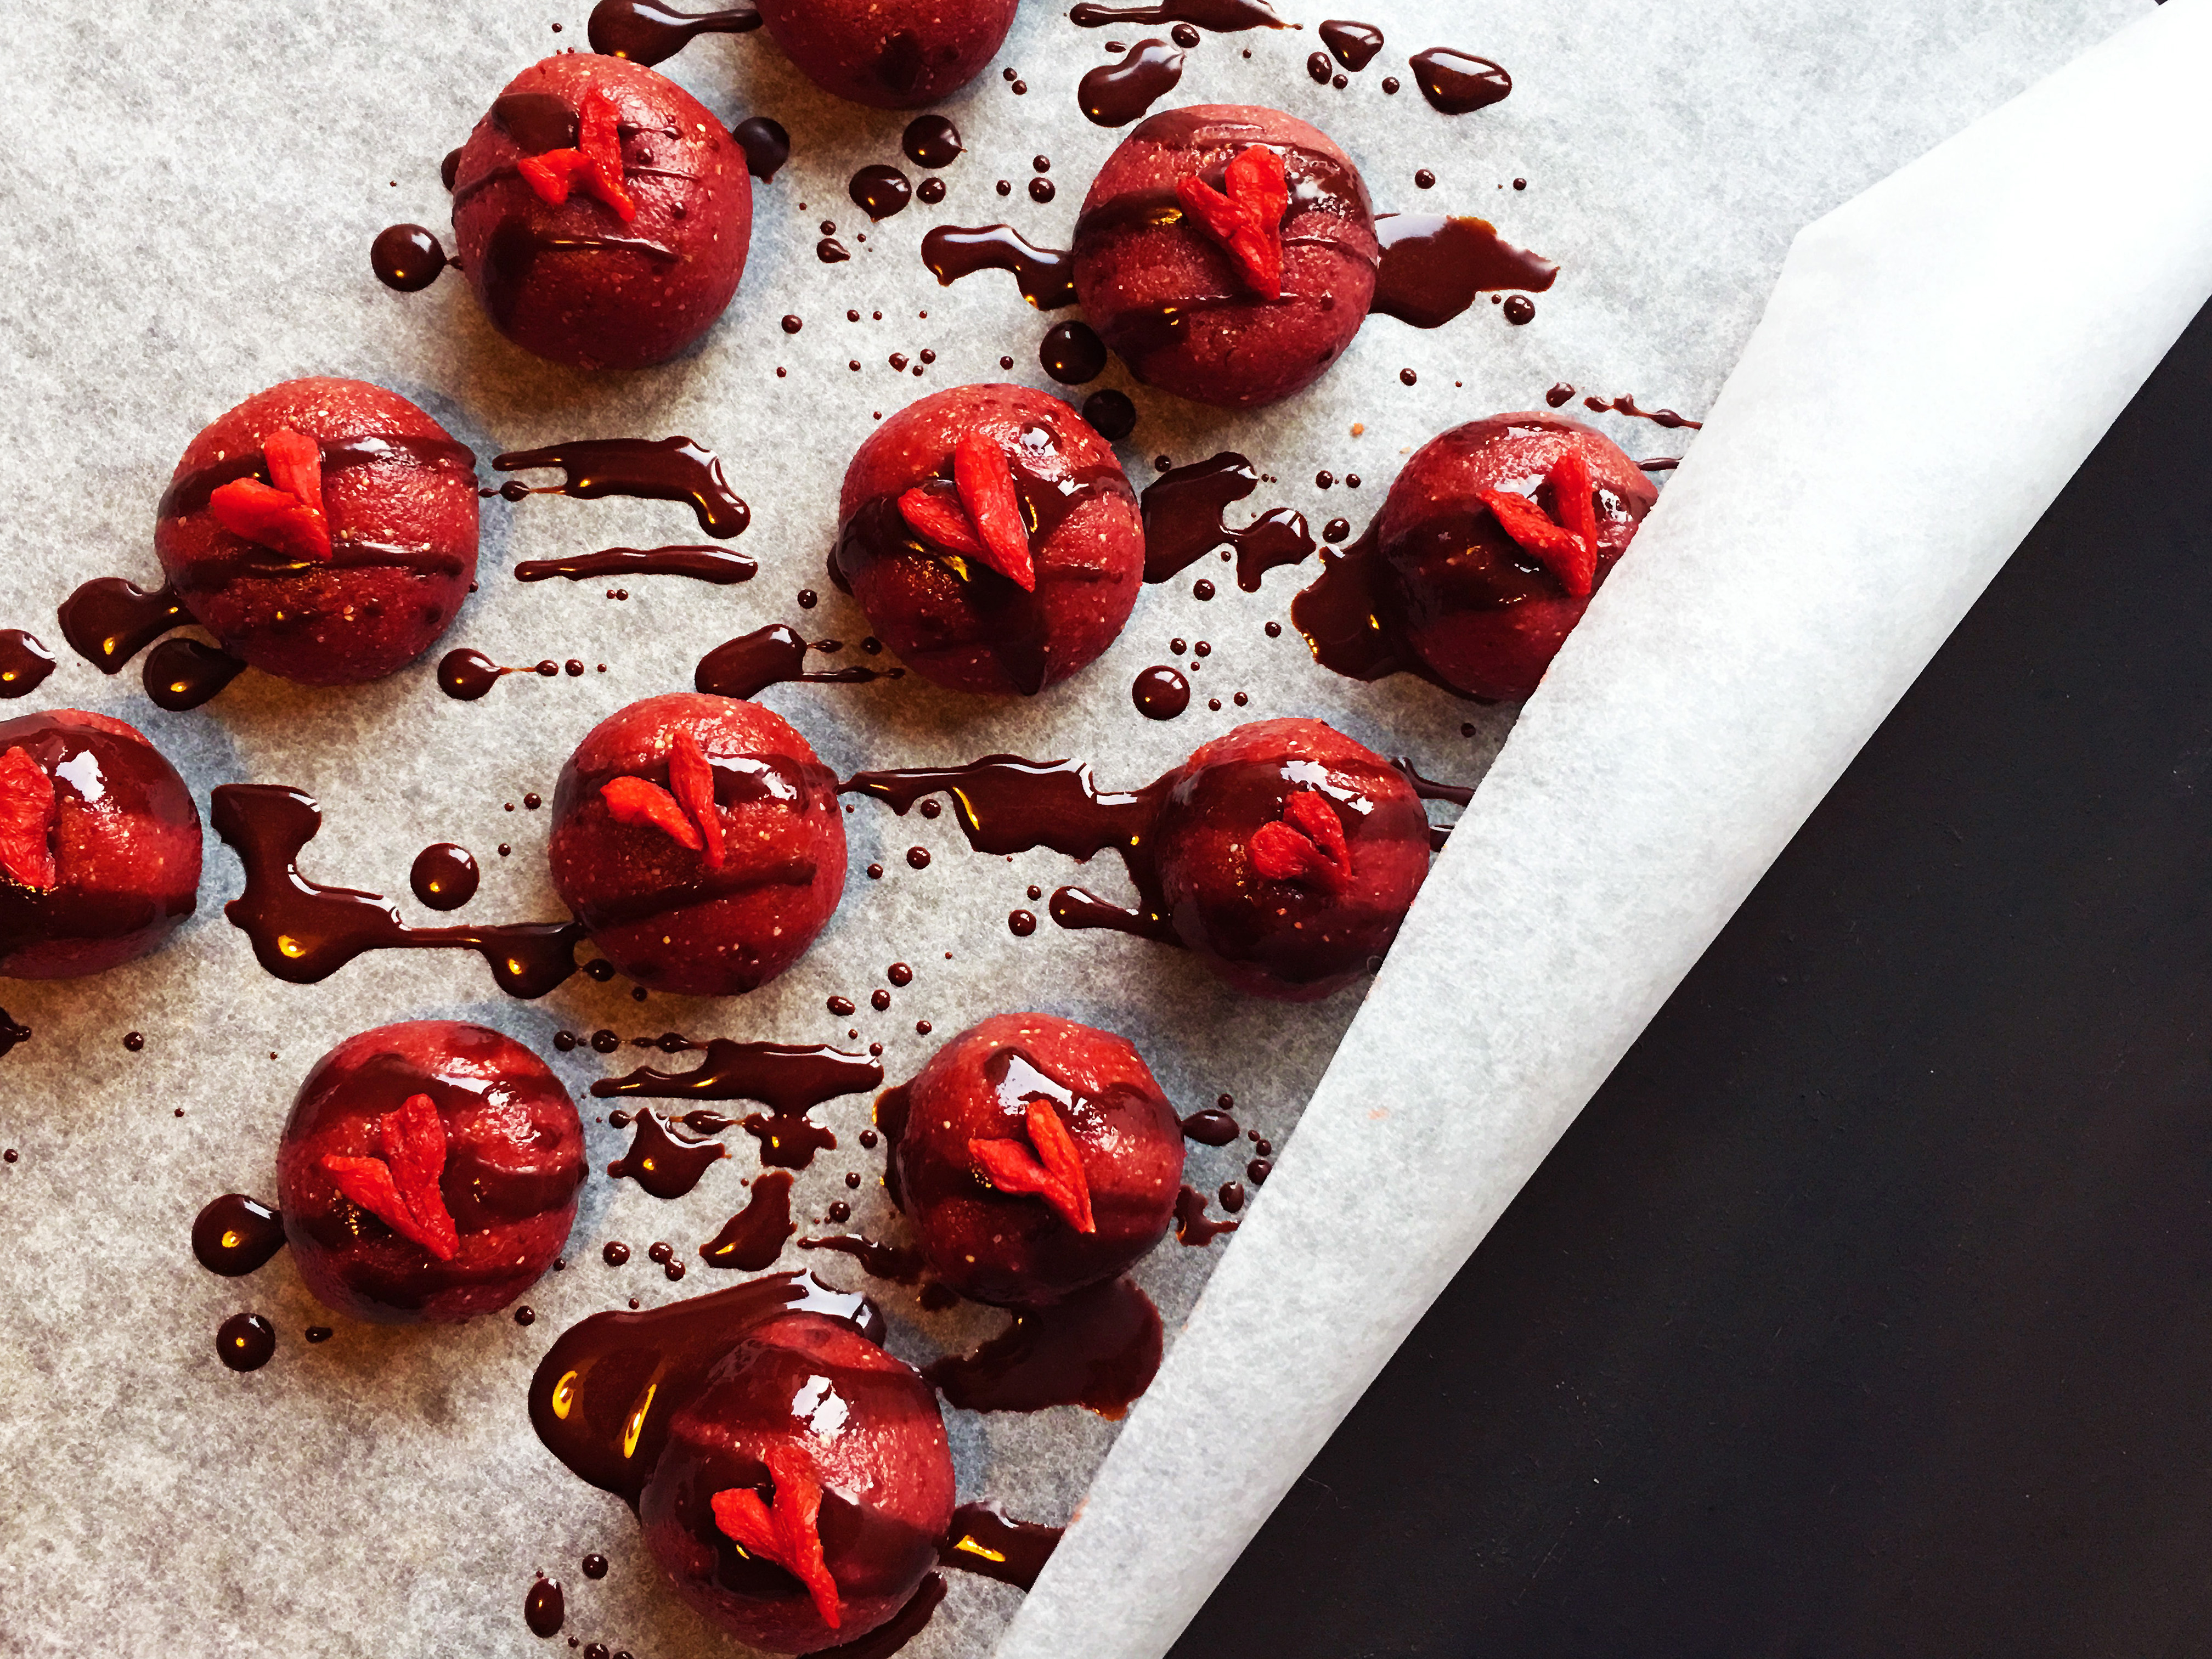 Strawberries and cream Paleo power balls drizzled with chocolate